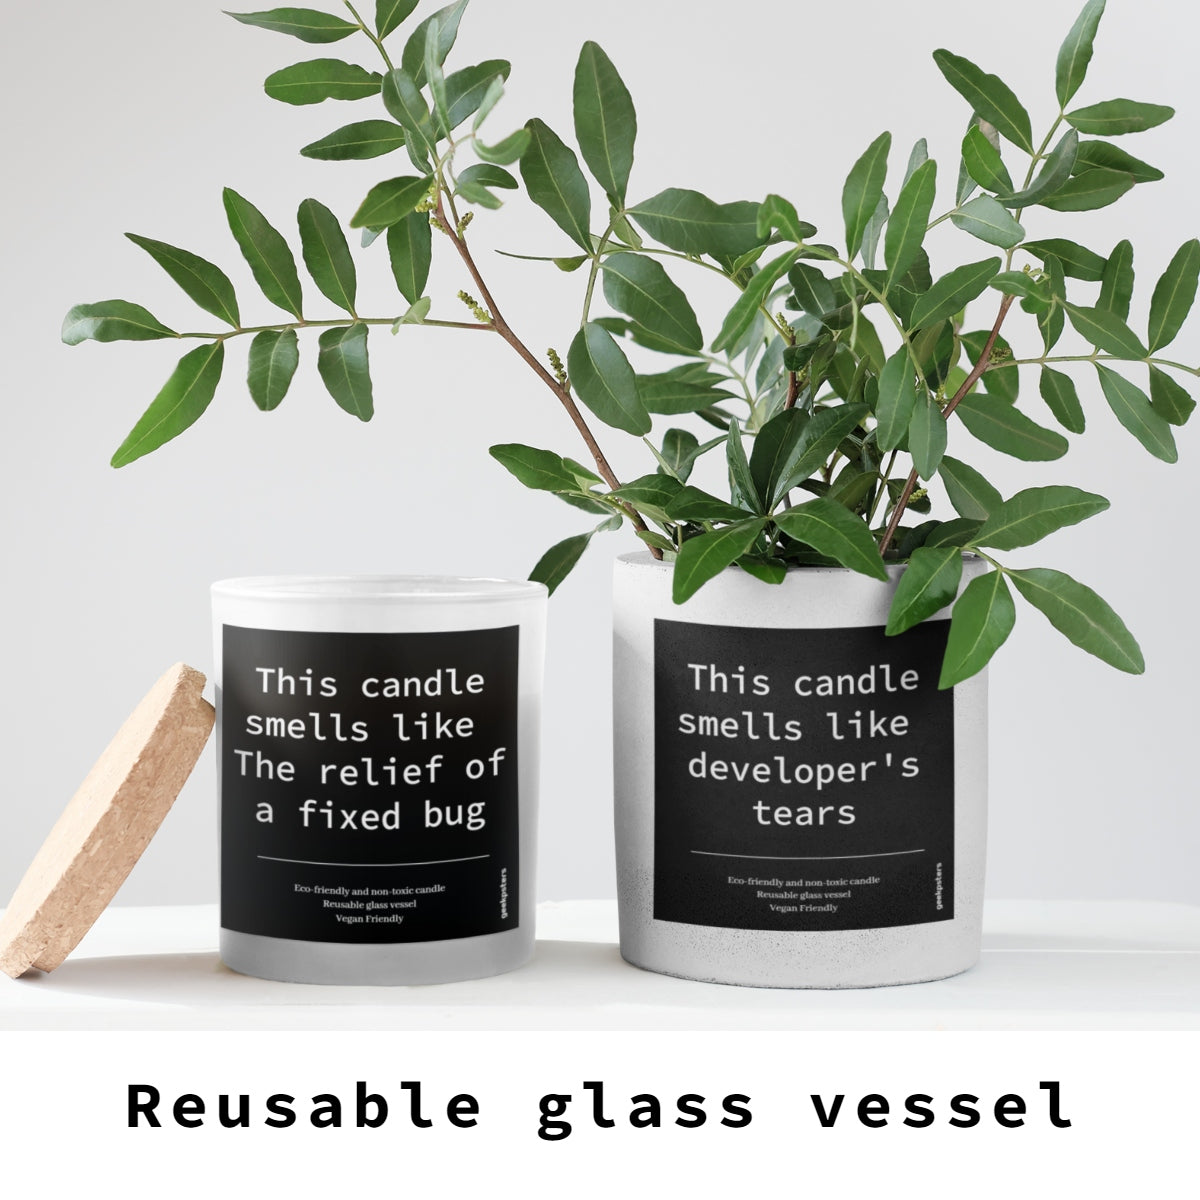 Two Agile: We Ship Fast and Brake Things scented soy candles in reusable glass vessels labeled with humorous tech-themed text, accompanied by green plant branches and a wooden object.